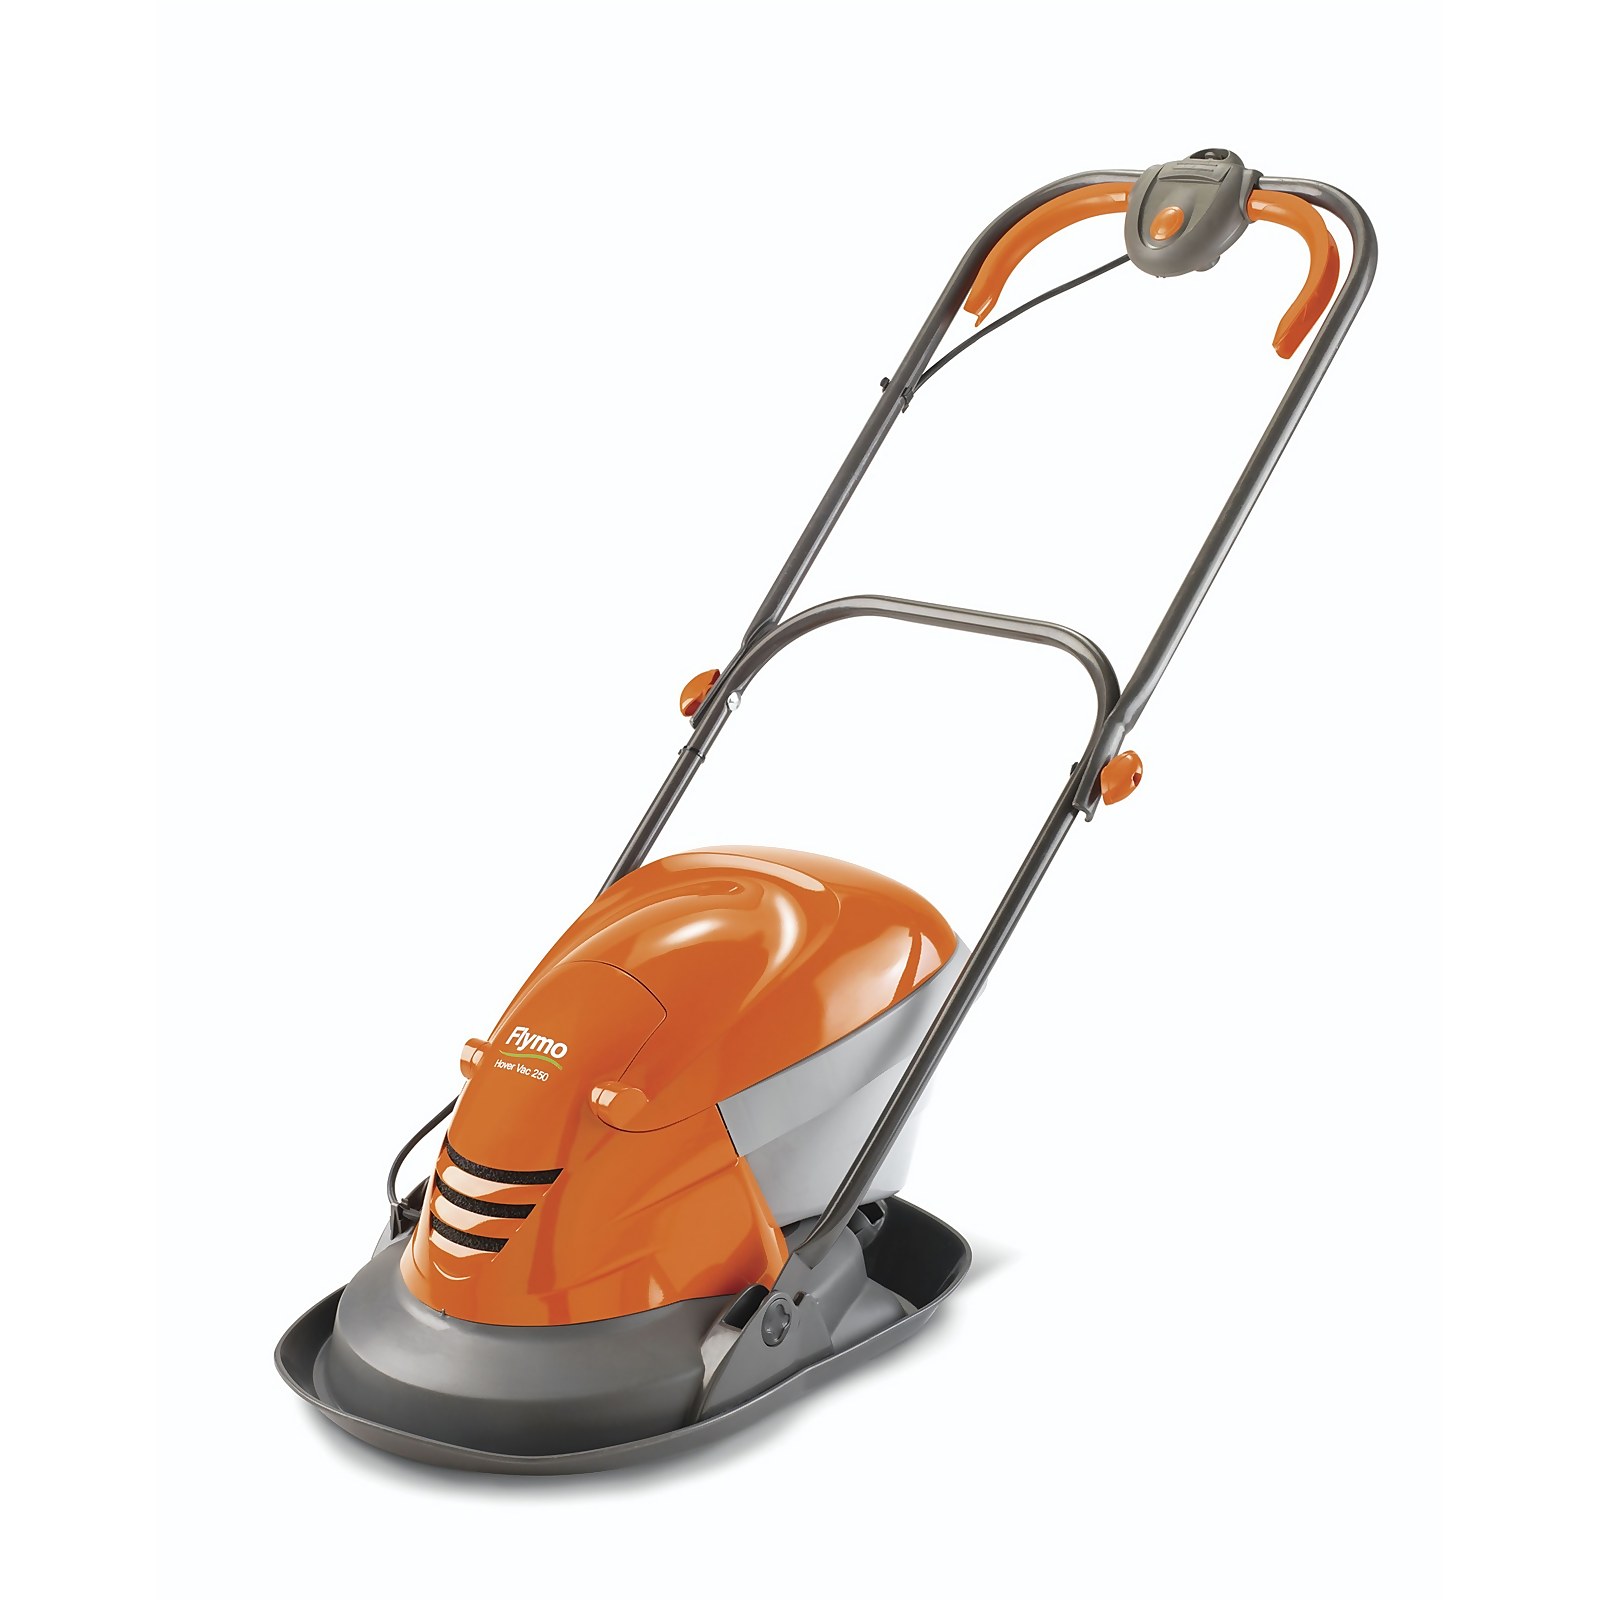 Photo of Flymo Hover Vac 250